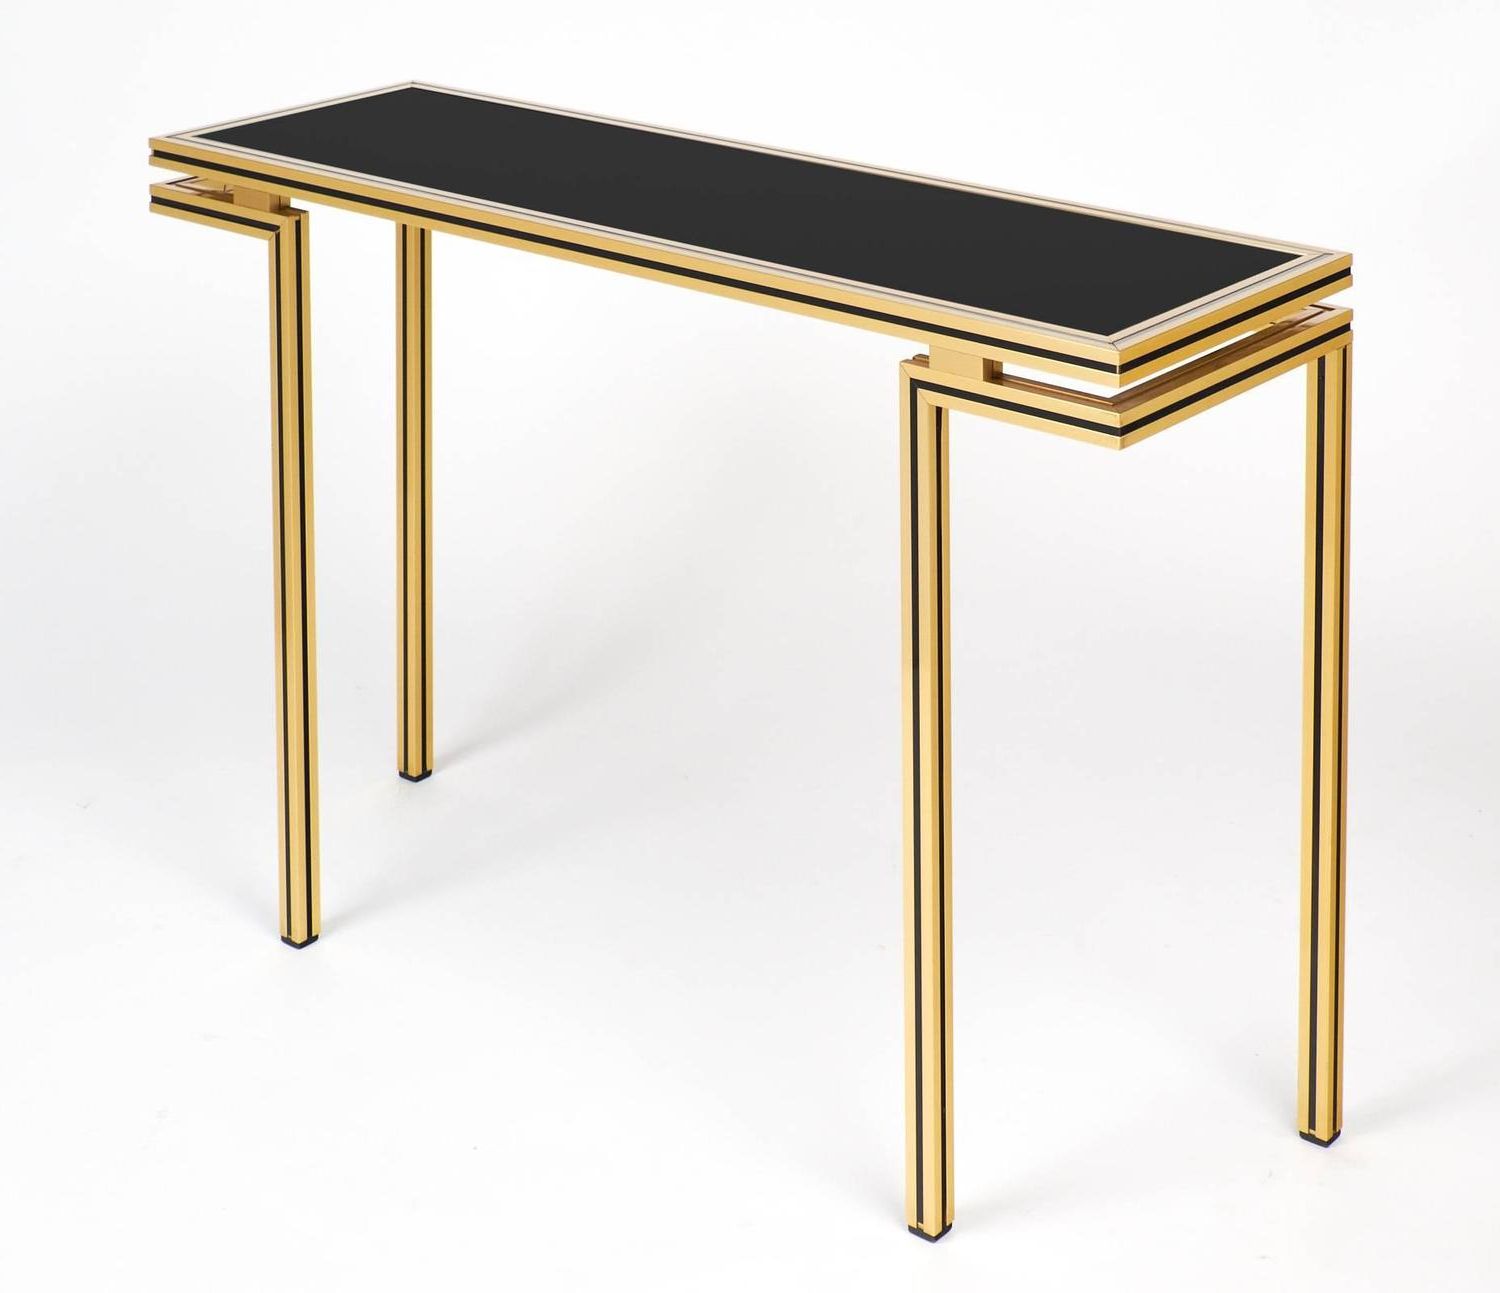 Antique Brass Round Console Tables Pertaining To Famous Vintage Black Glass Top Brass Console Tablepierre (View 1 of 10)